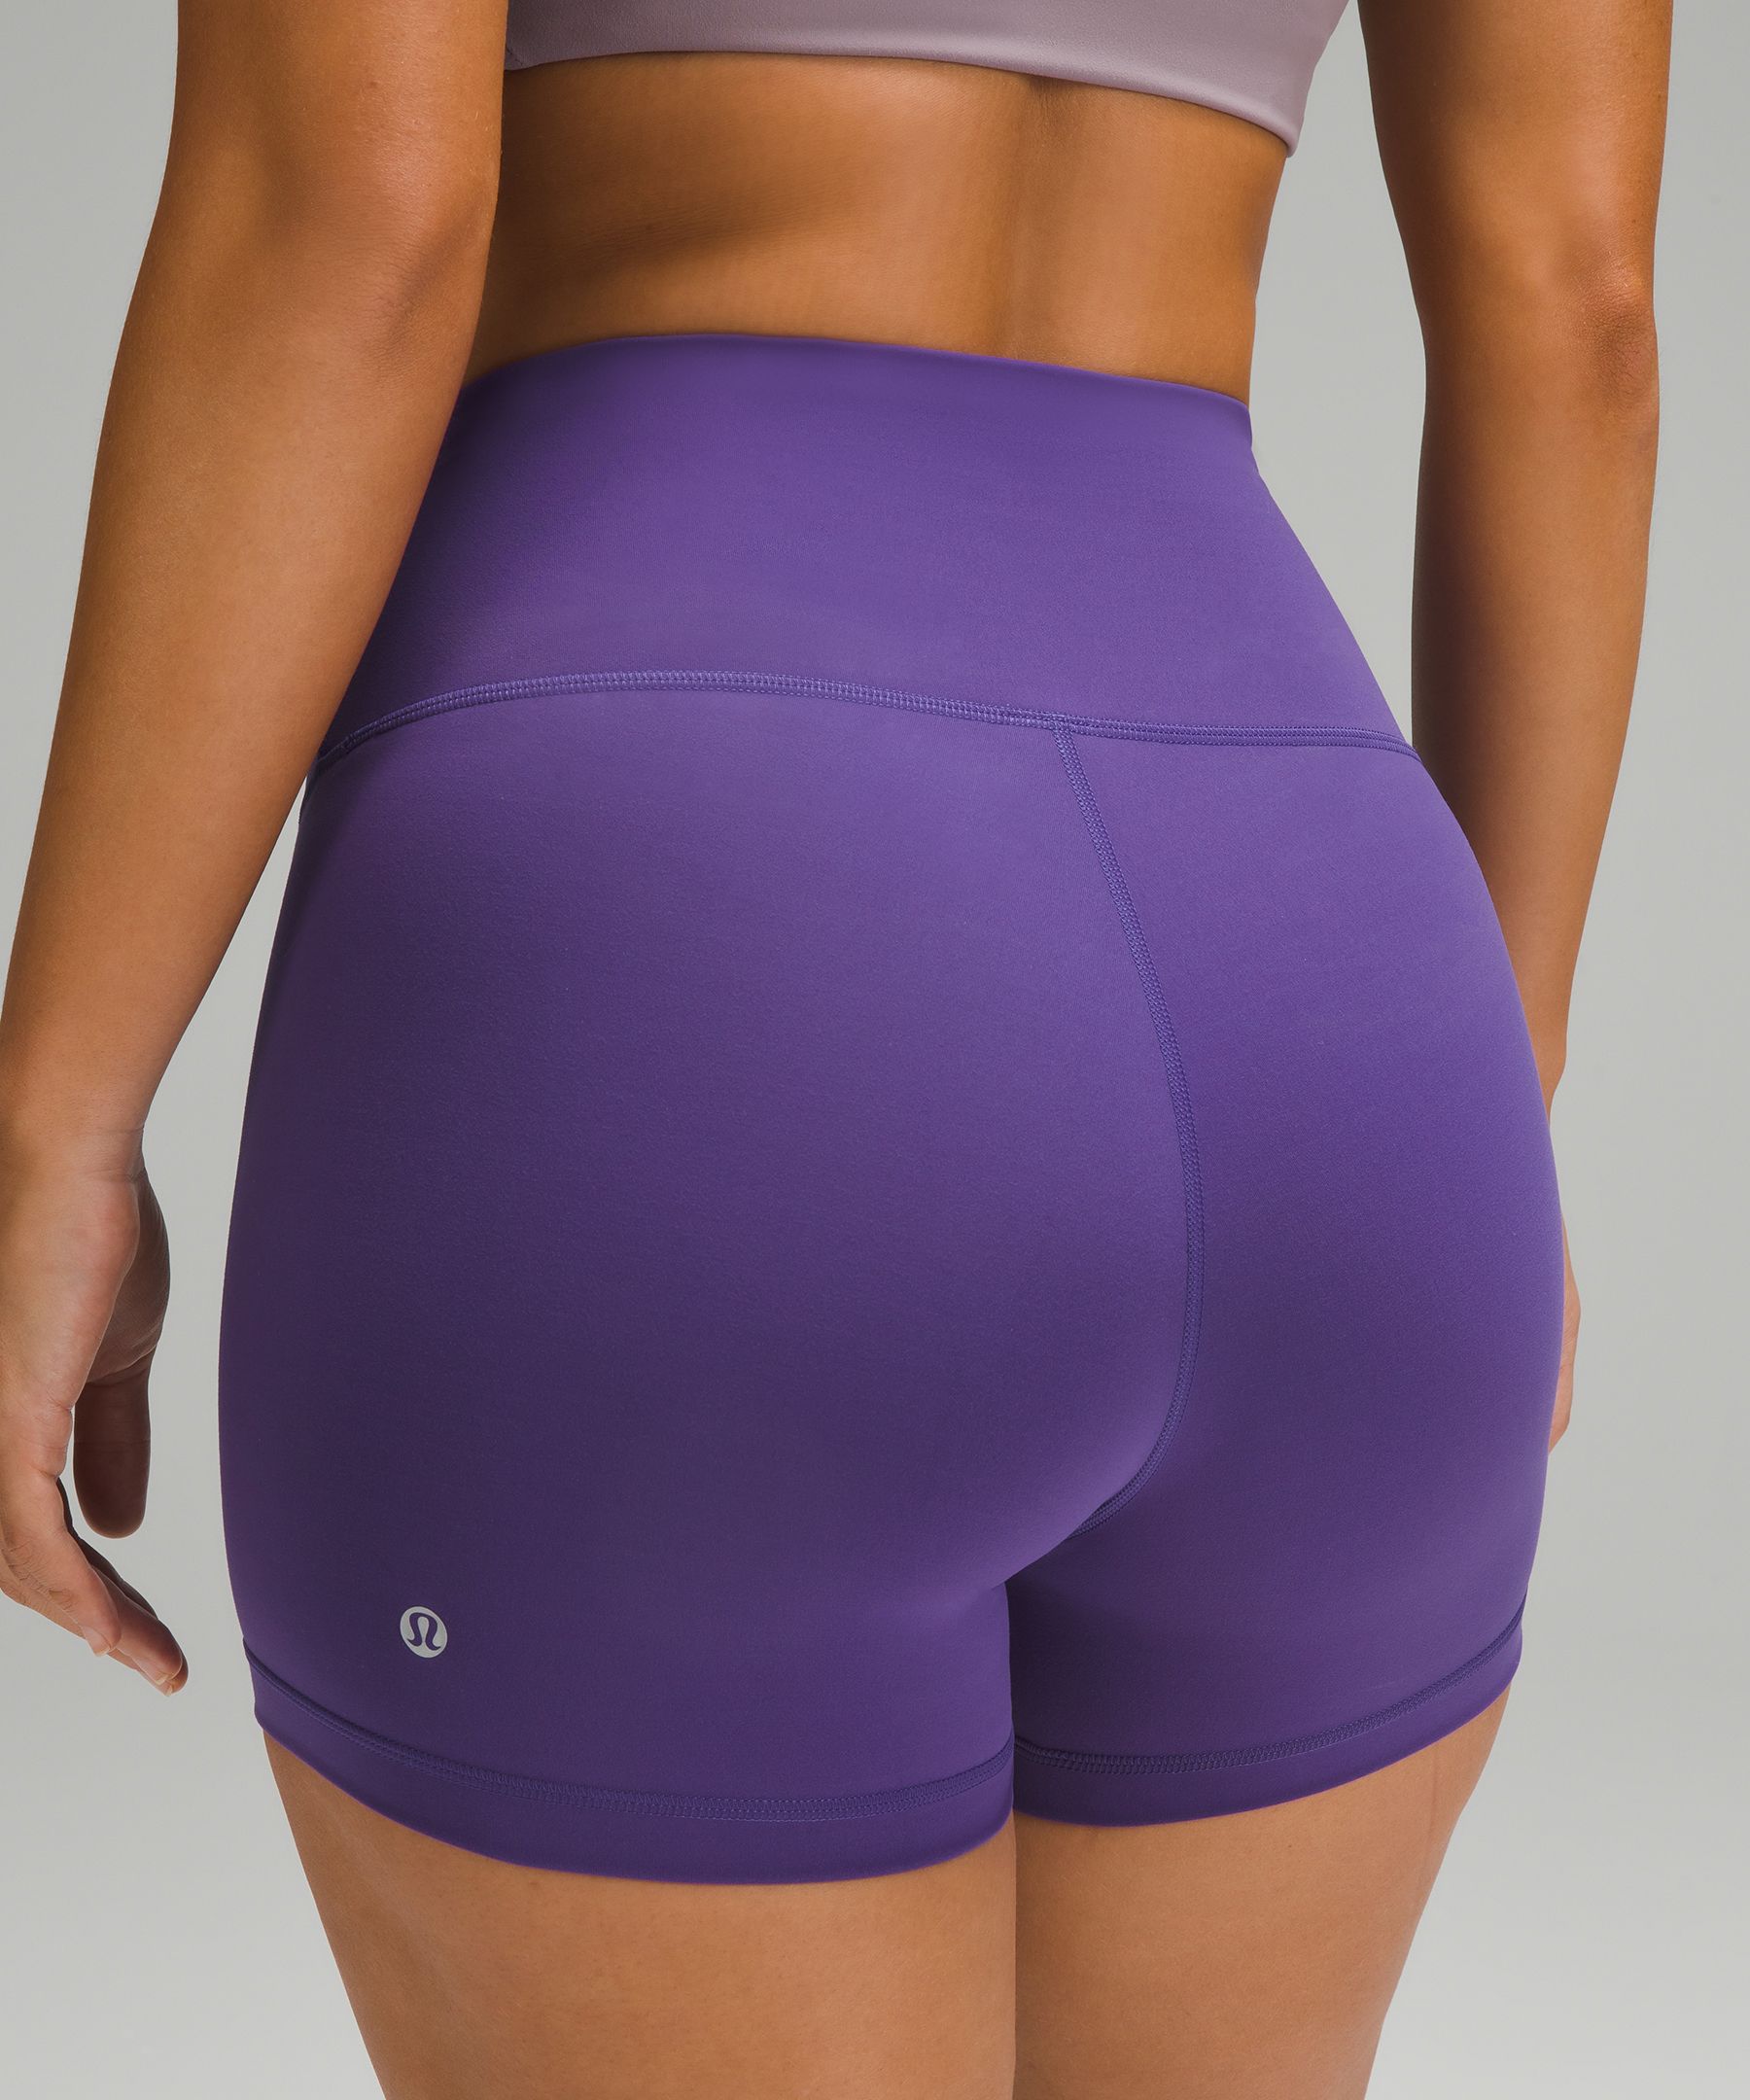 Tight waist band? How to gently stretch out the waistband of your lululemon  shorts ft. Principal Dancer shorts : r/lululemon